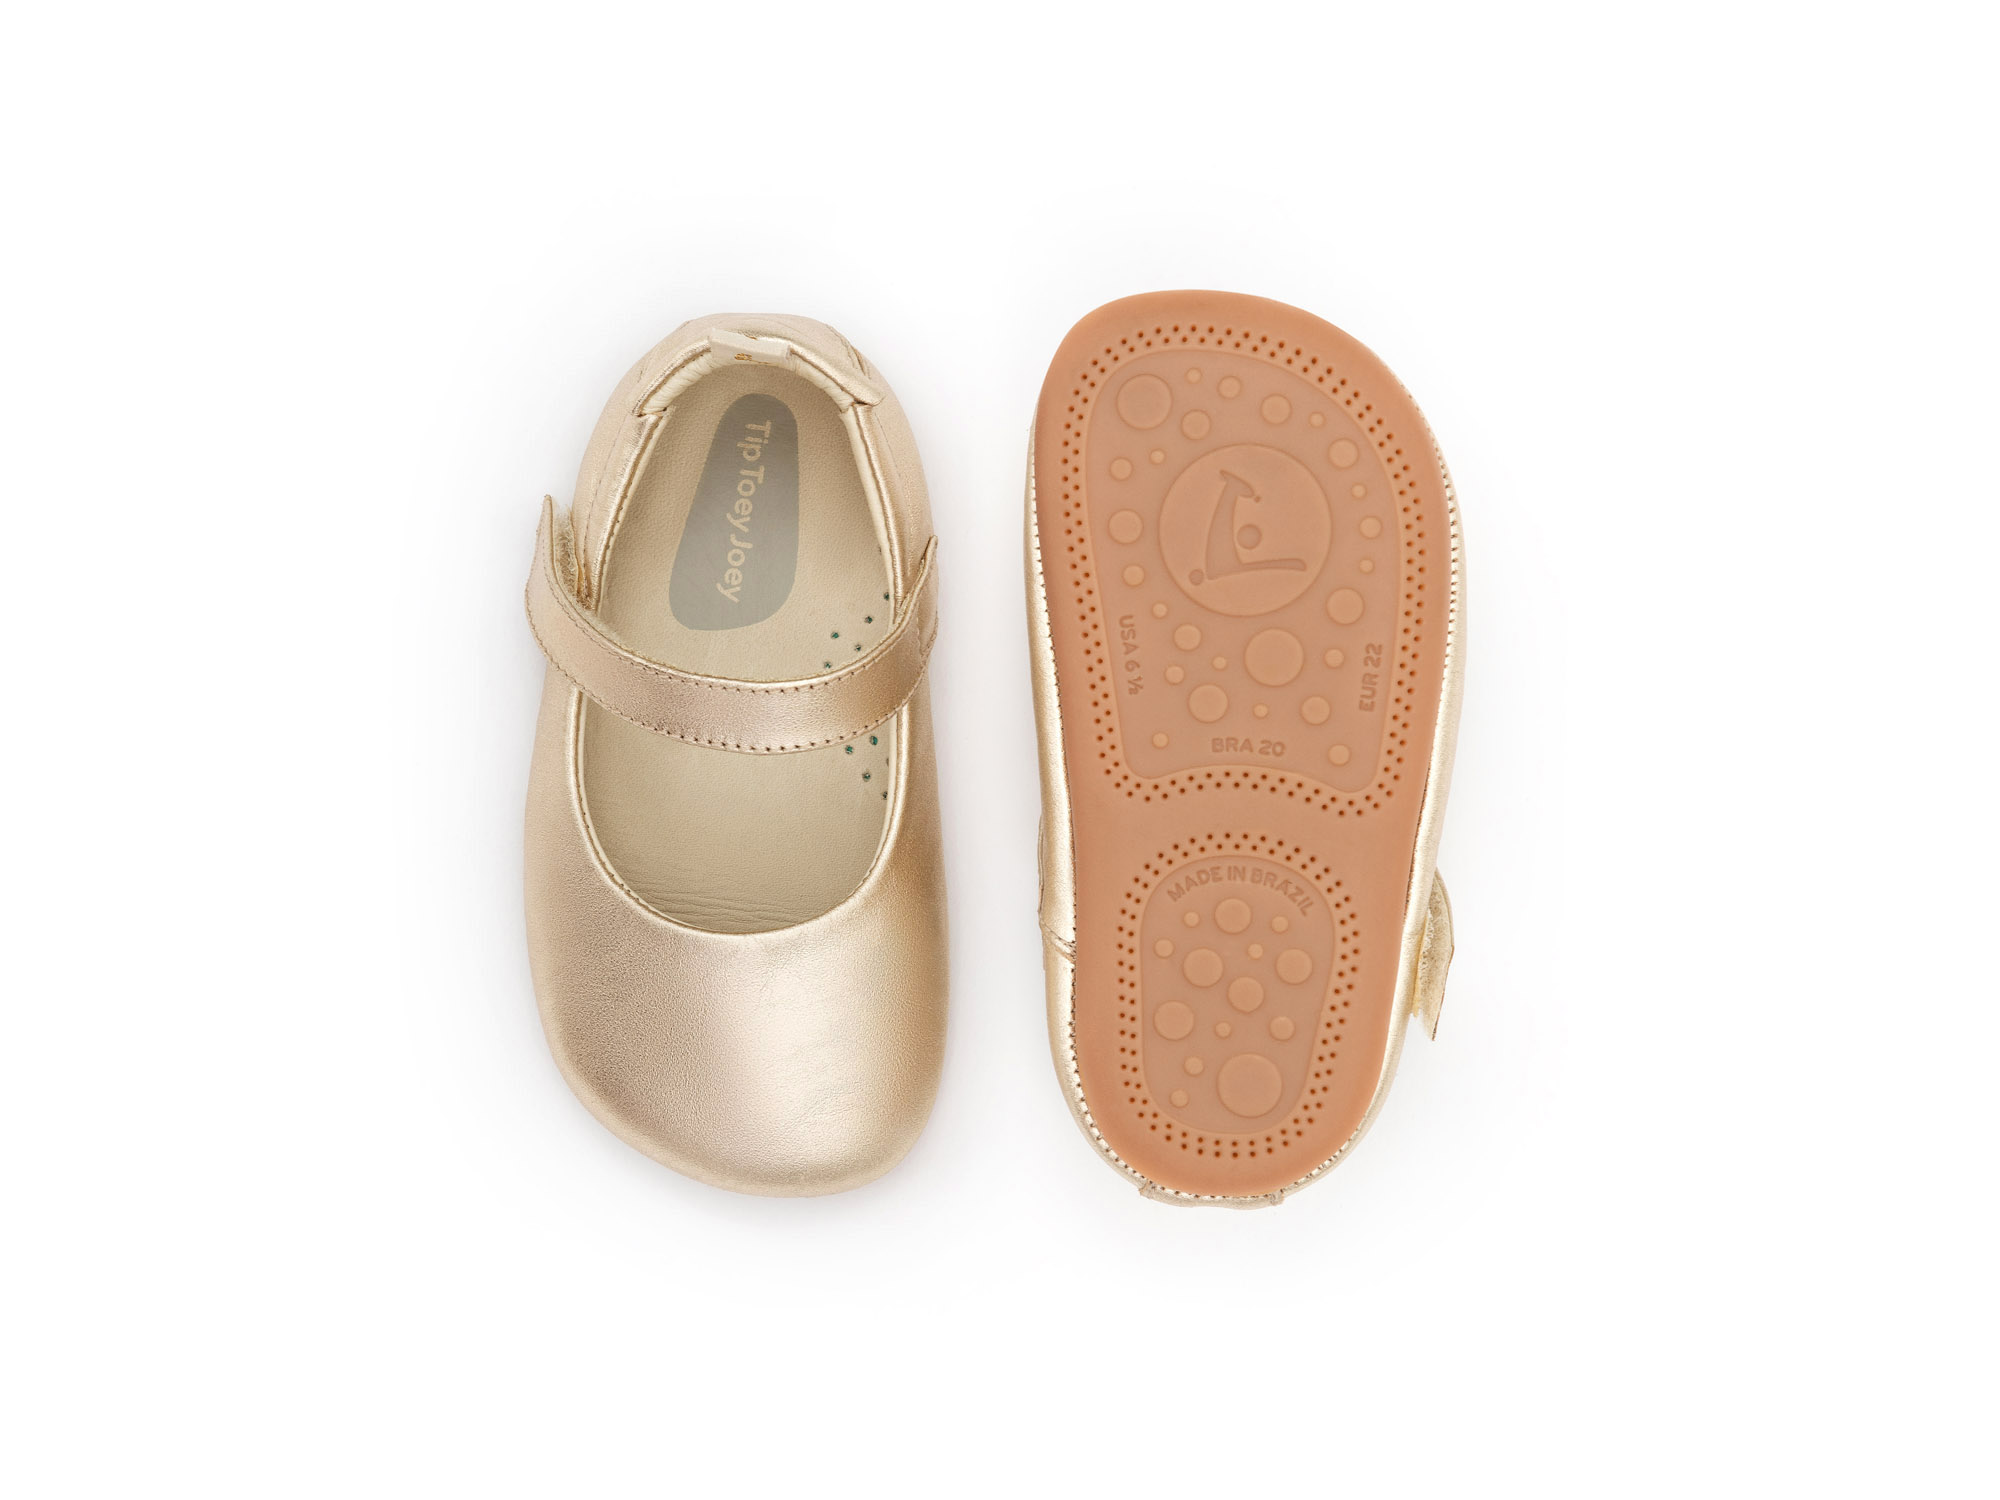 UP & GO Mary Janes for Girls Dolly | Tip Toey Joey - Australia - 2